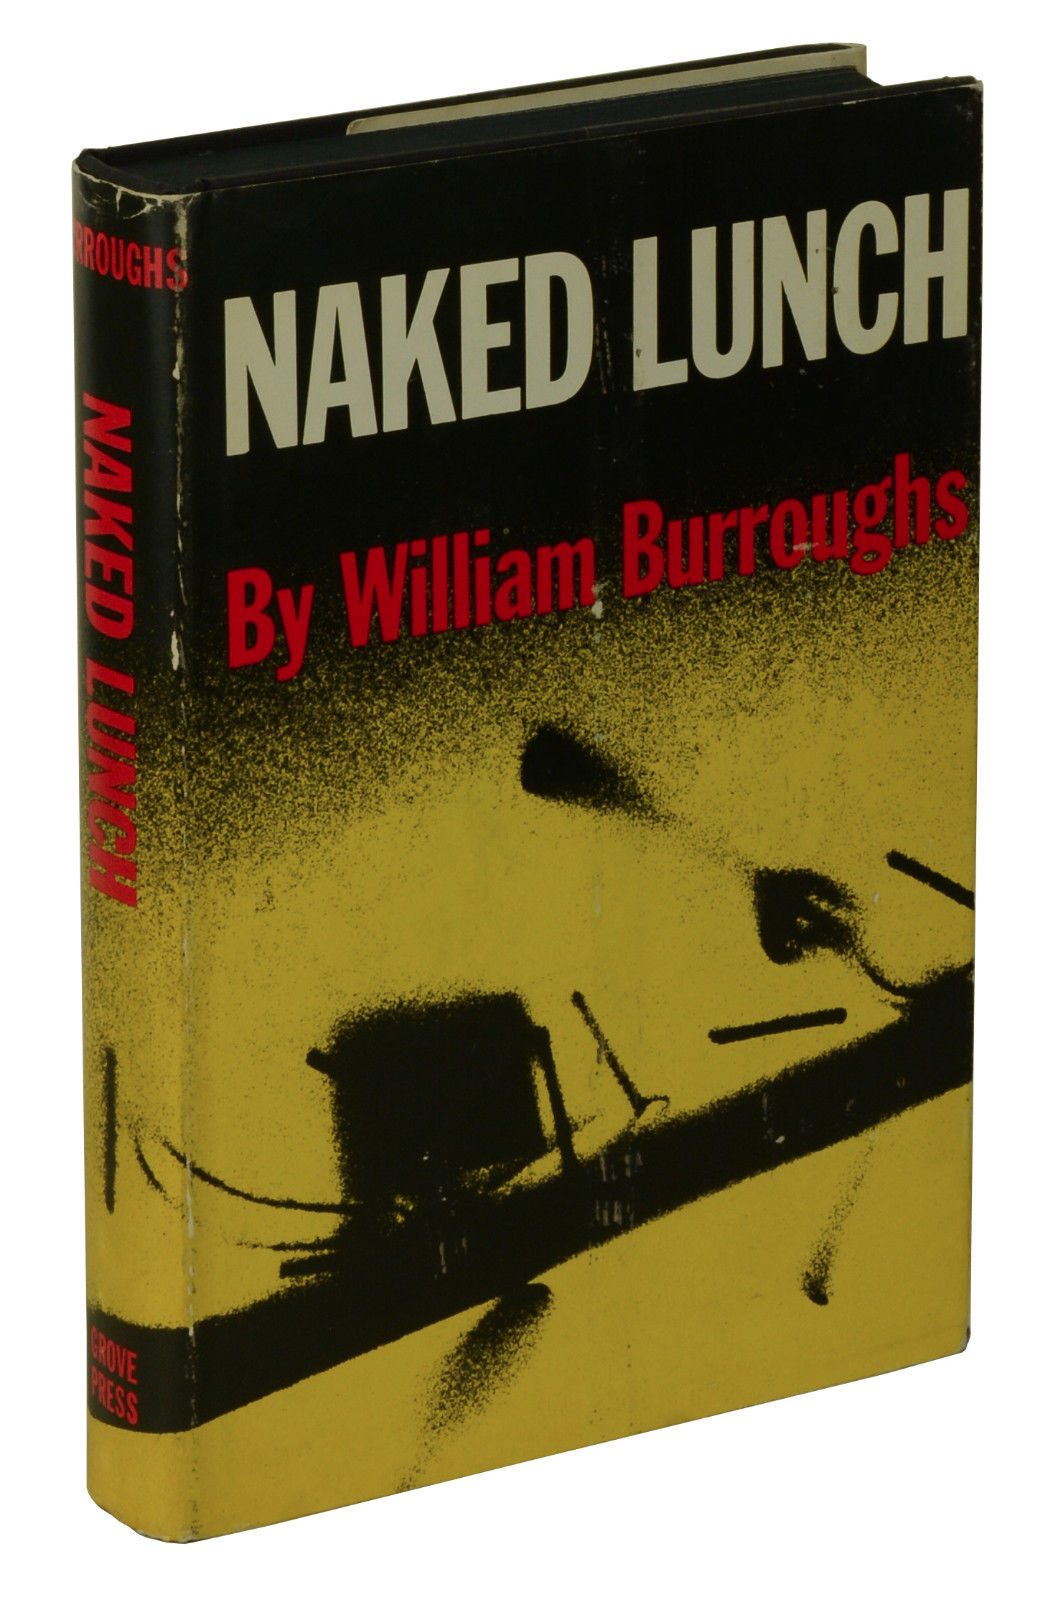 Naked Lunch by William Burroughs 1959 hardcover book | Etsy